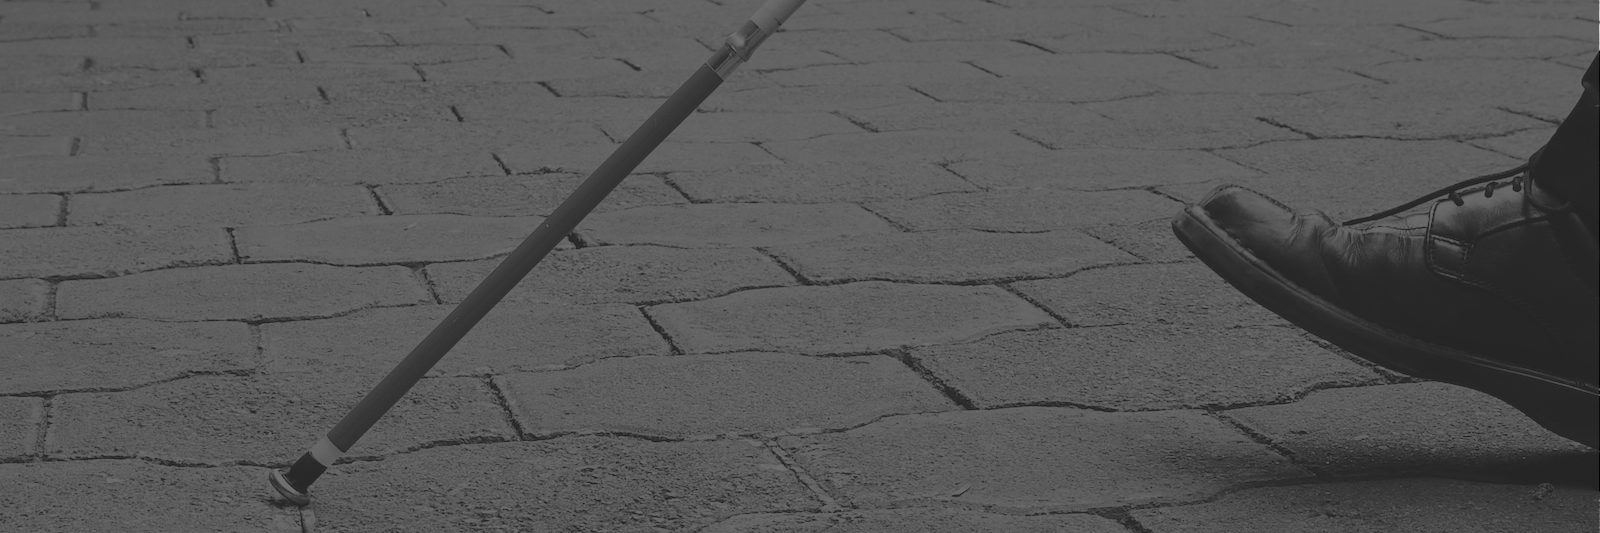 Blind person's cane against brick street